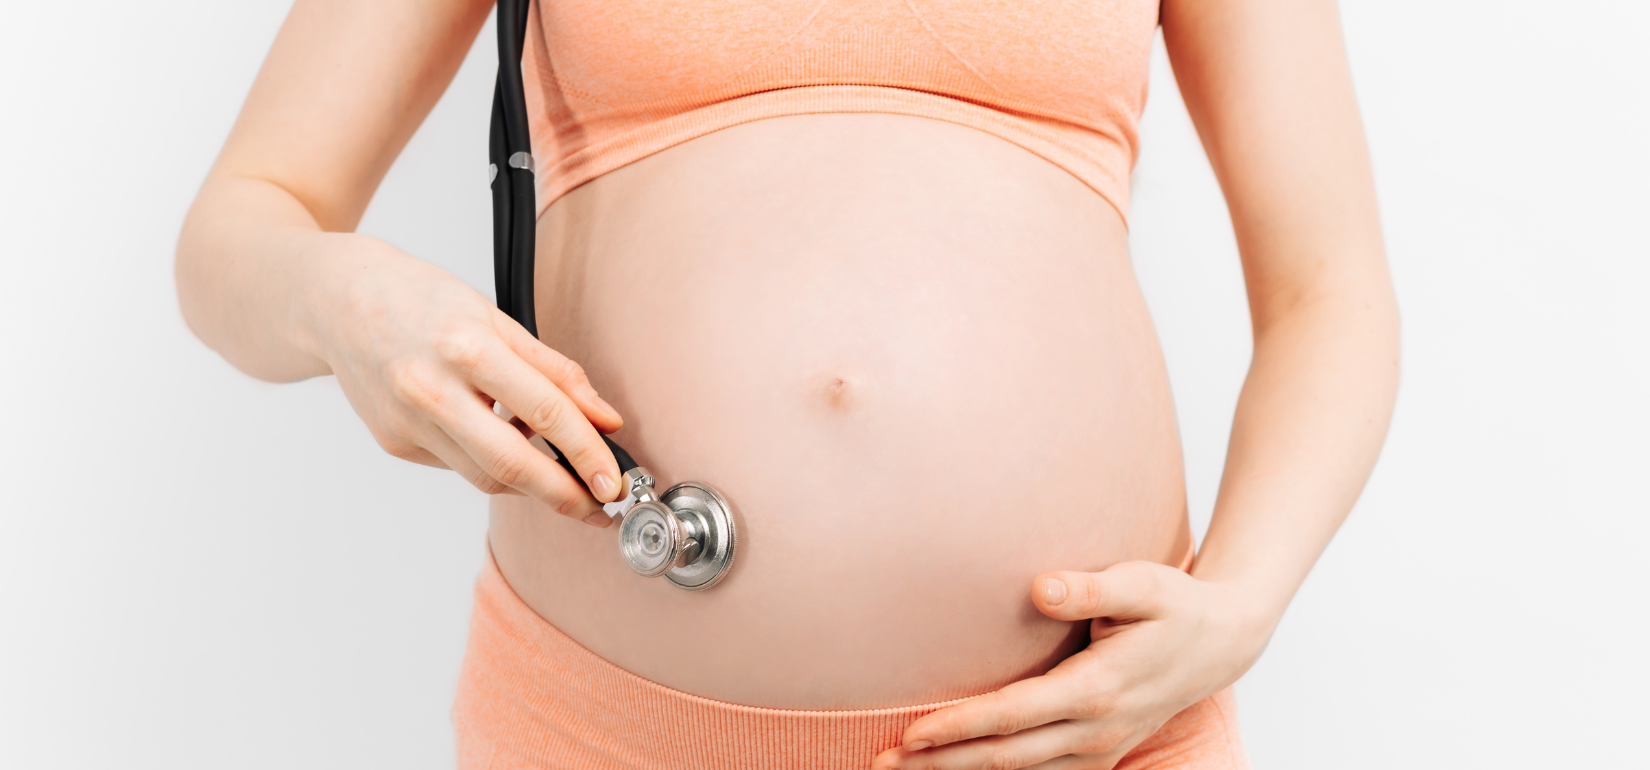 How to reduce protein in urine during pregnancy?